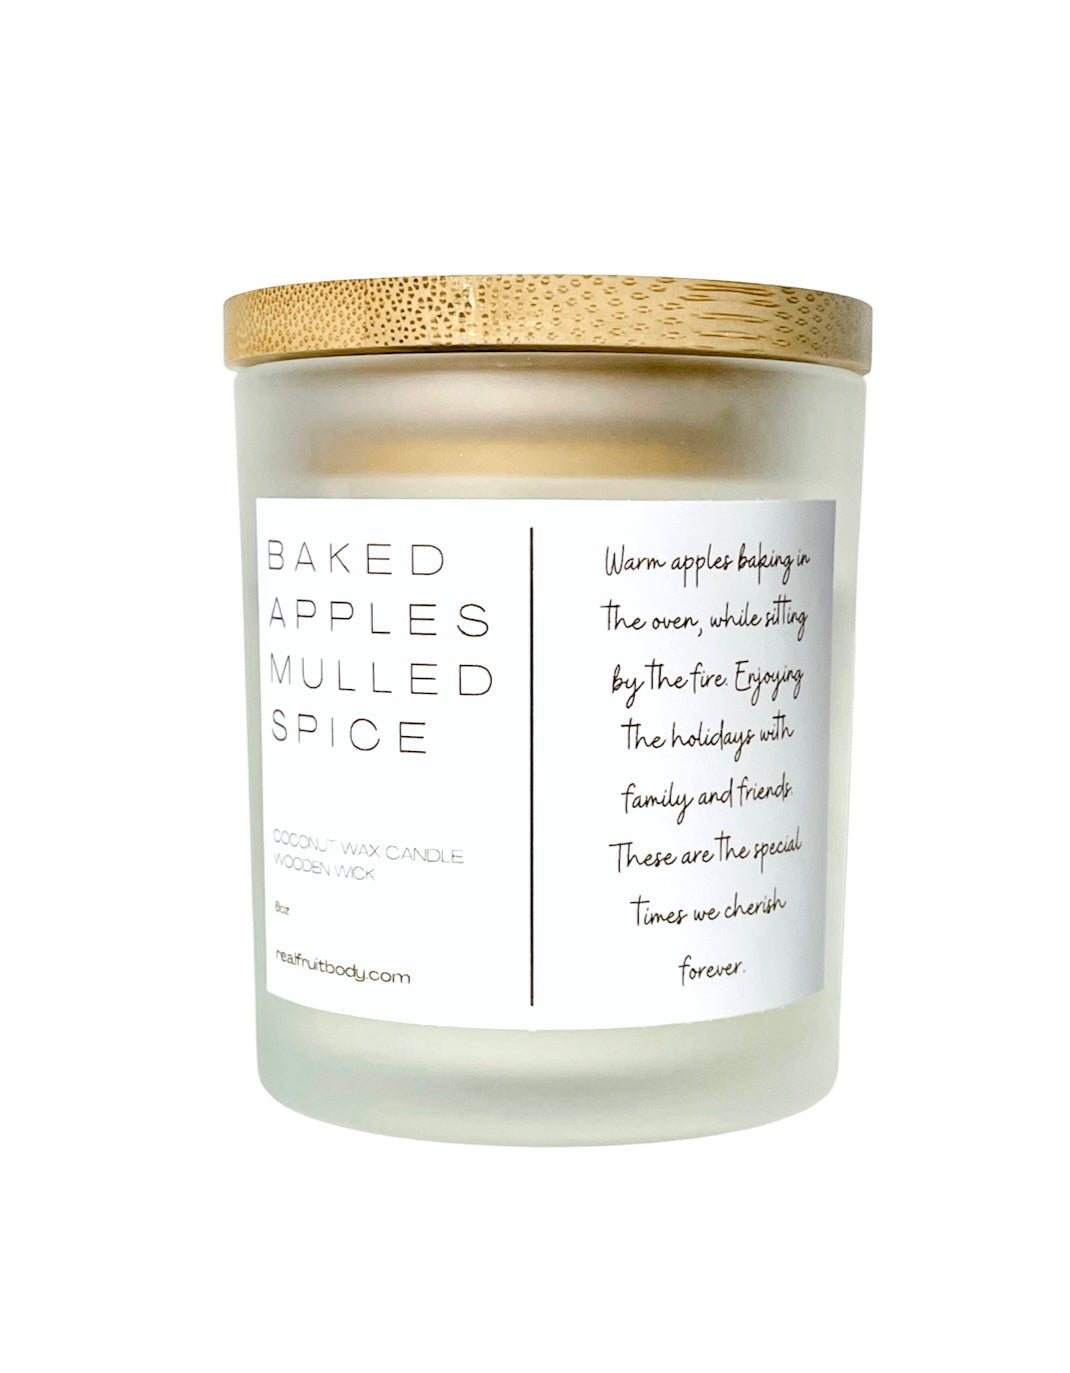 Real Fruit Body Organic Spa Candle